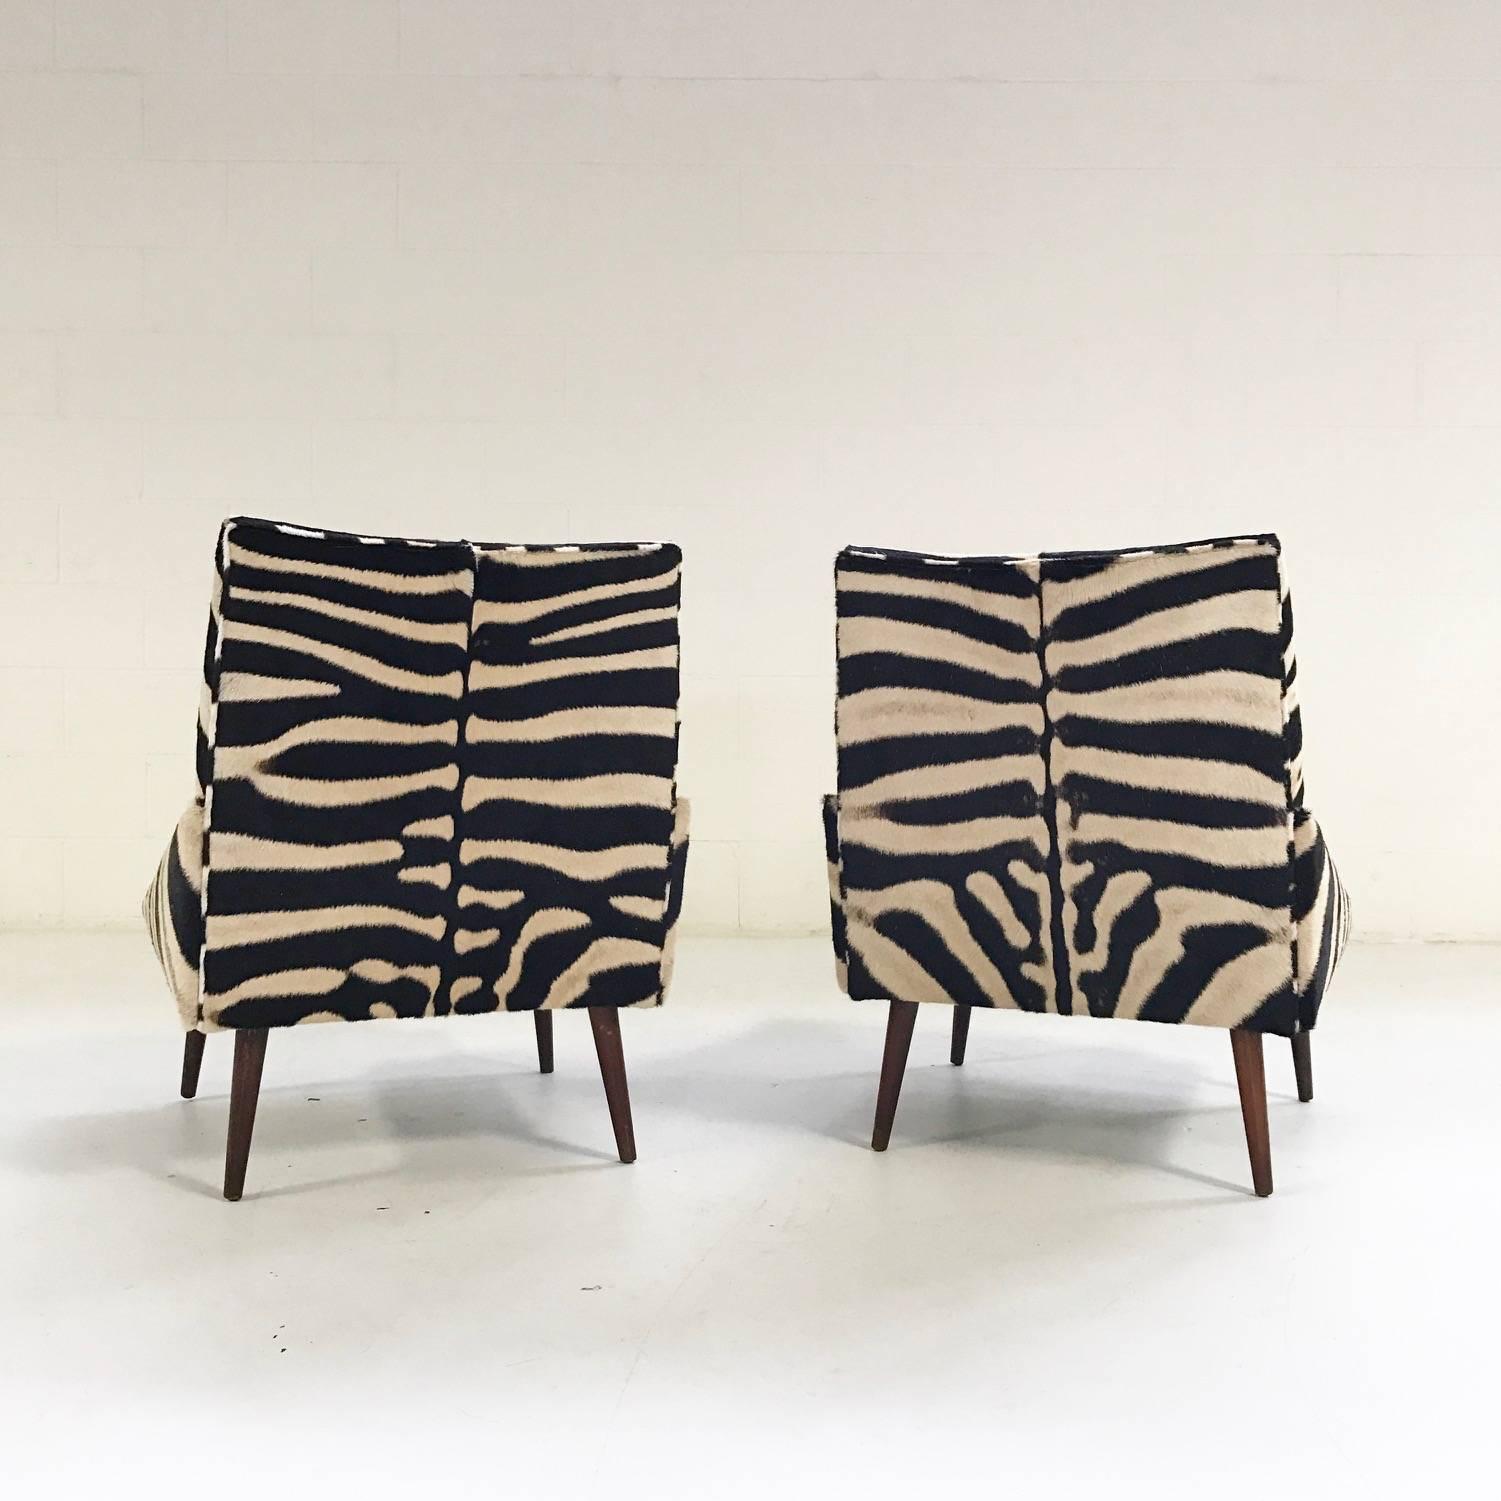 Mid-Century Modern Pair of Adrian Pearsall Style Lounge Chairs Restored in Zebra Hide